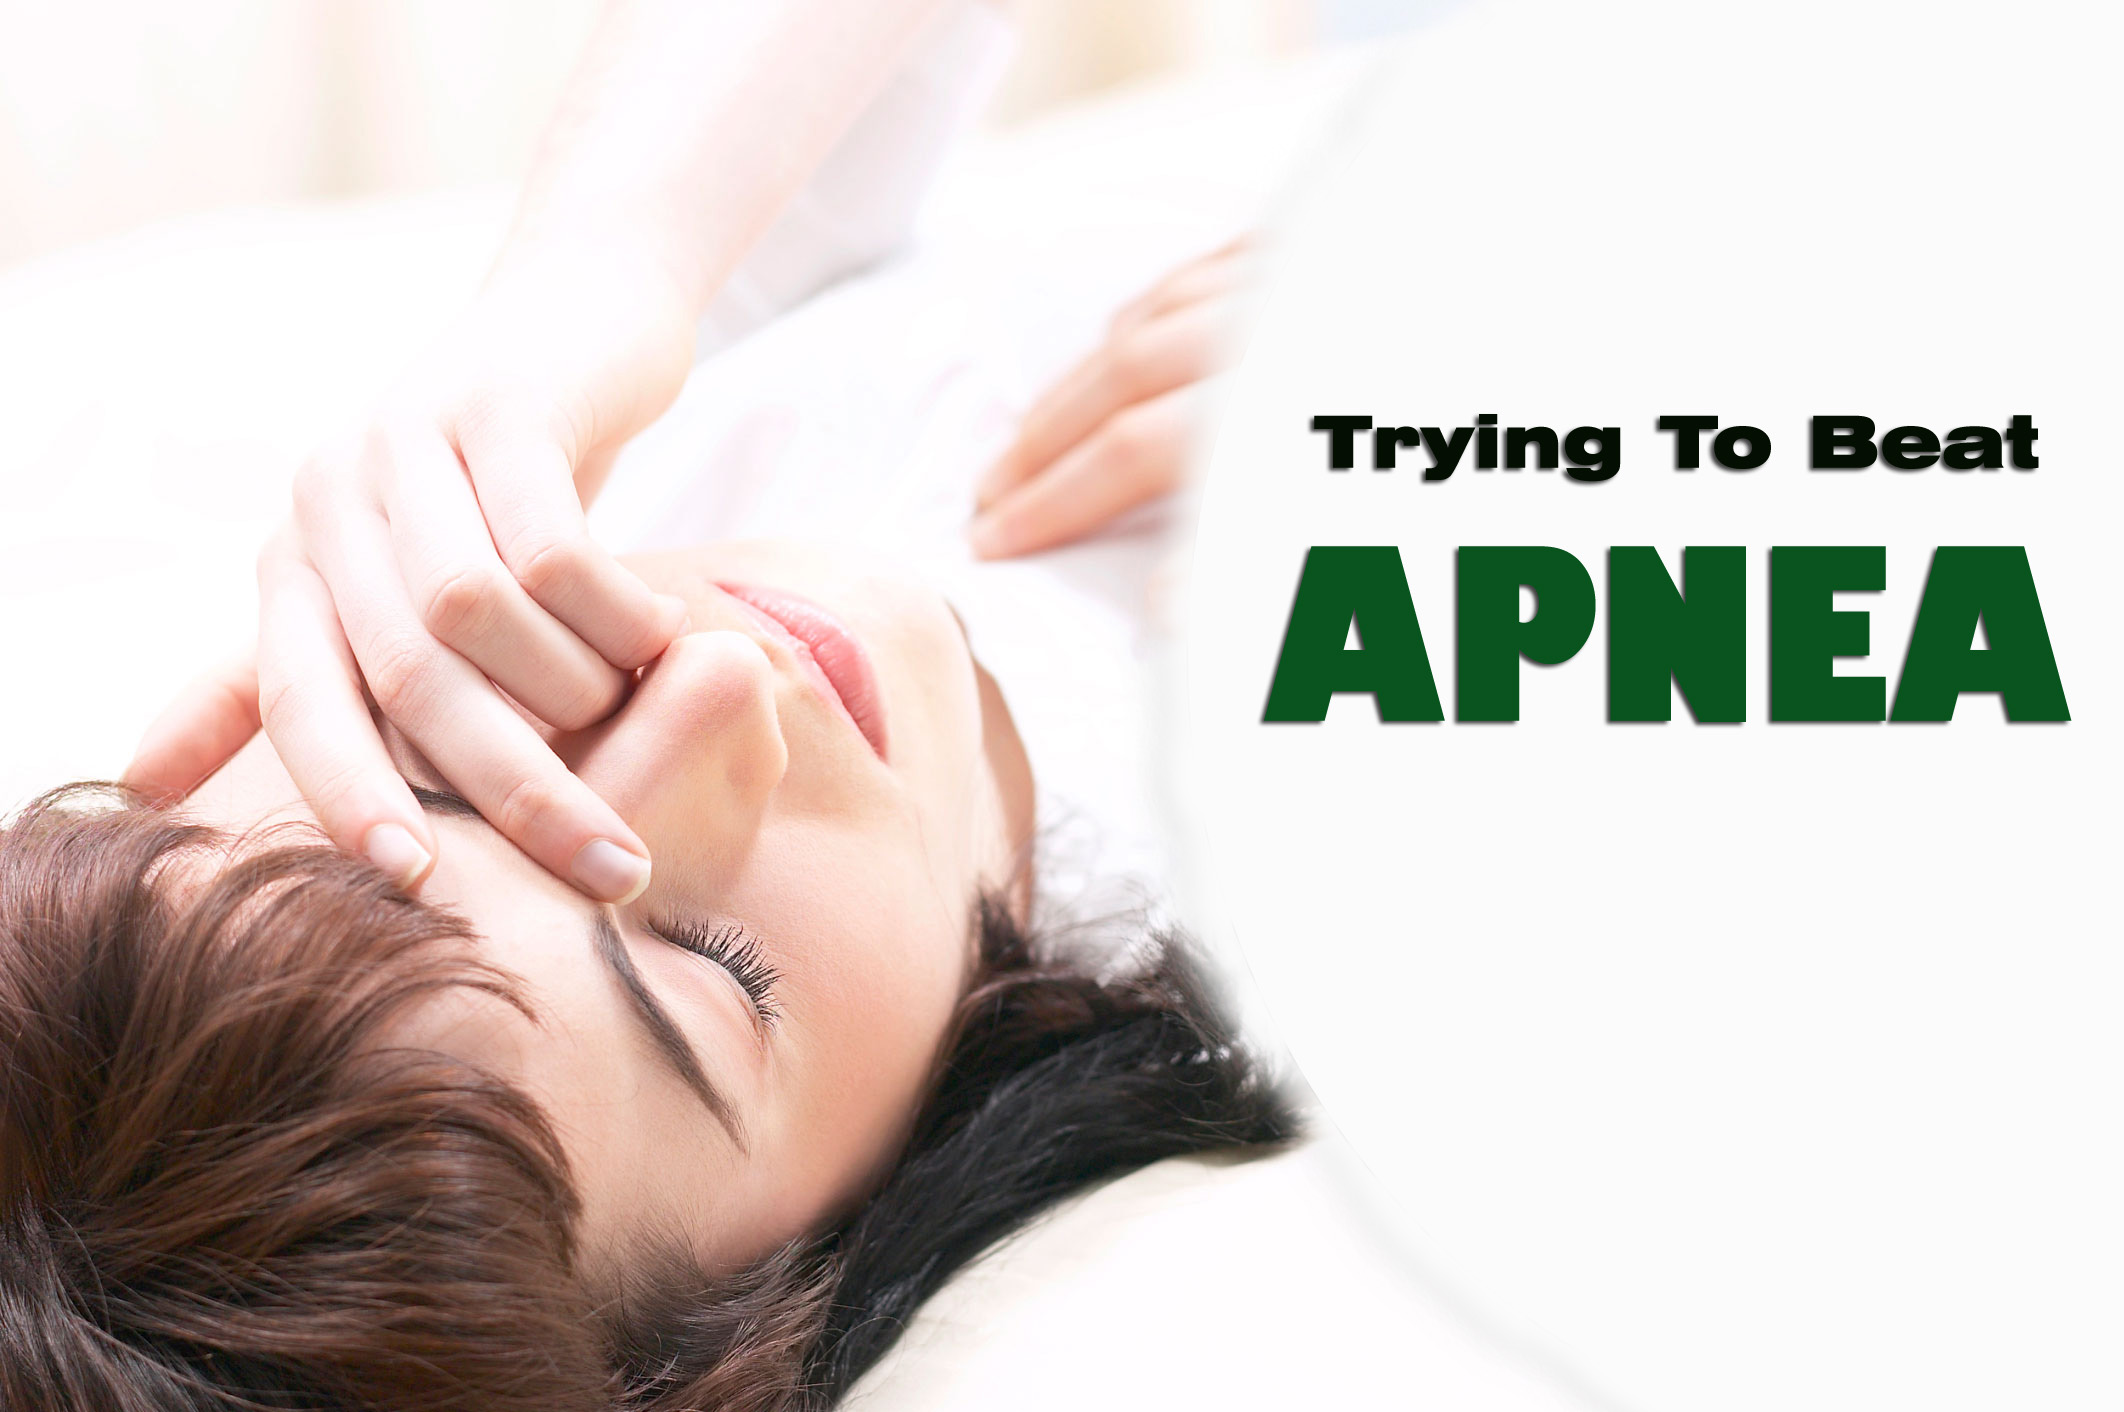 Trying To Beat Apnea? This Information Is To Suit Your Needs